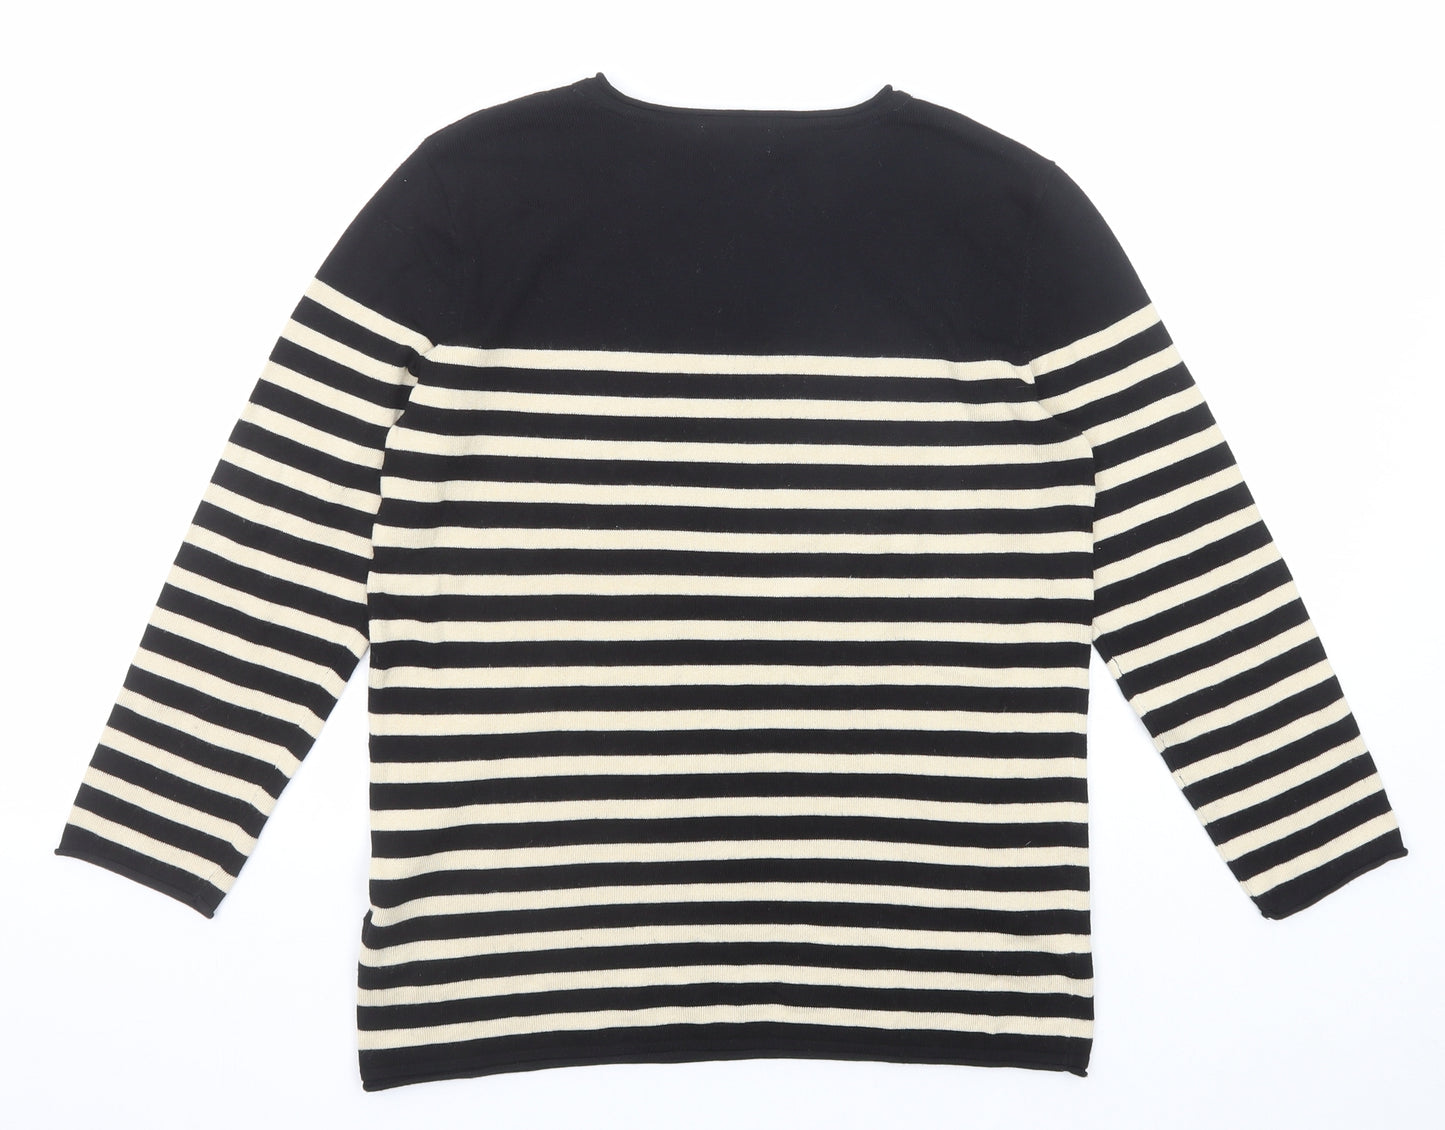 H&M Womens Black Boat Neck Striped Acrylic Pullover Jumper Size XS